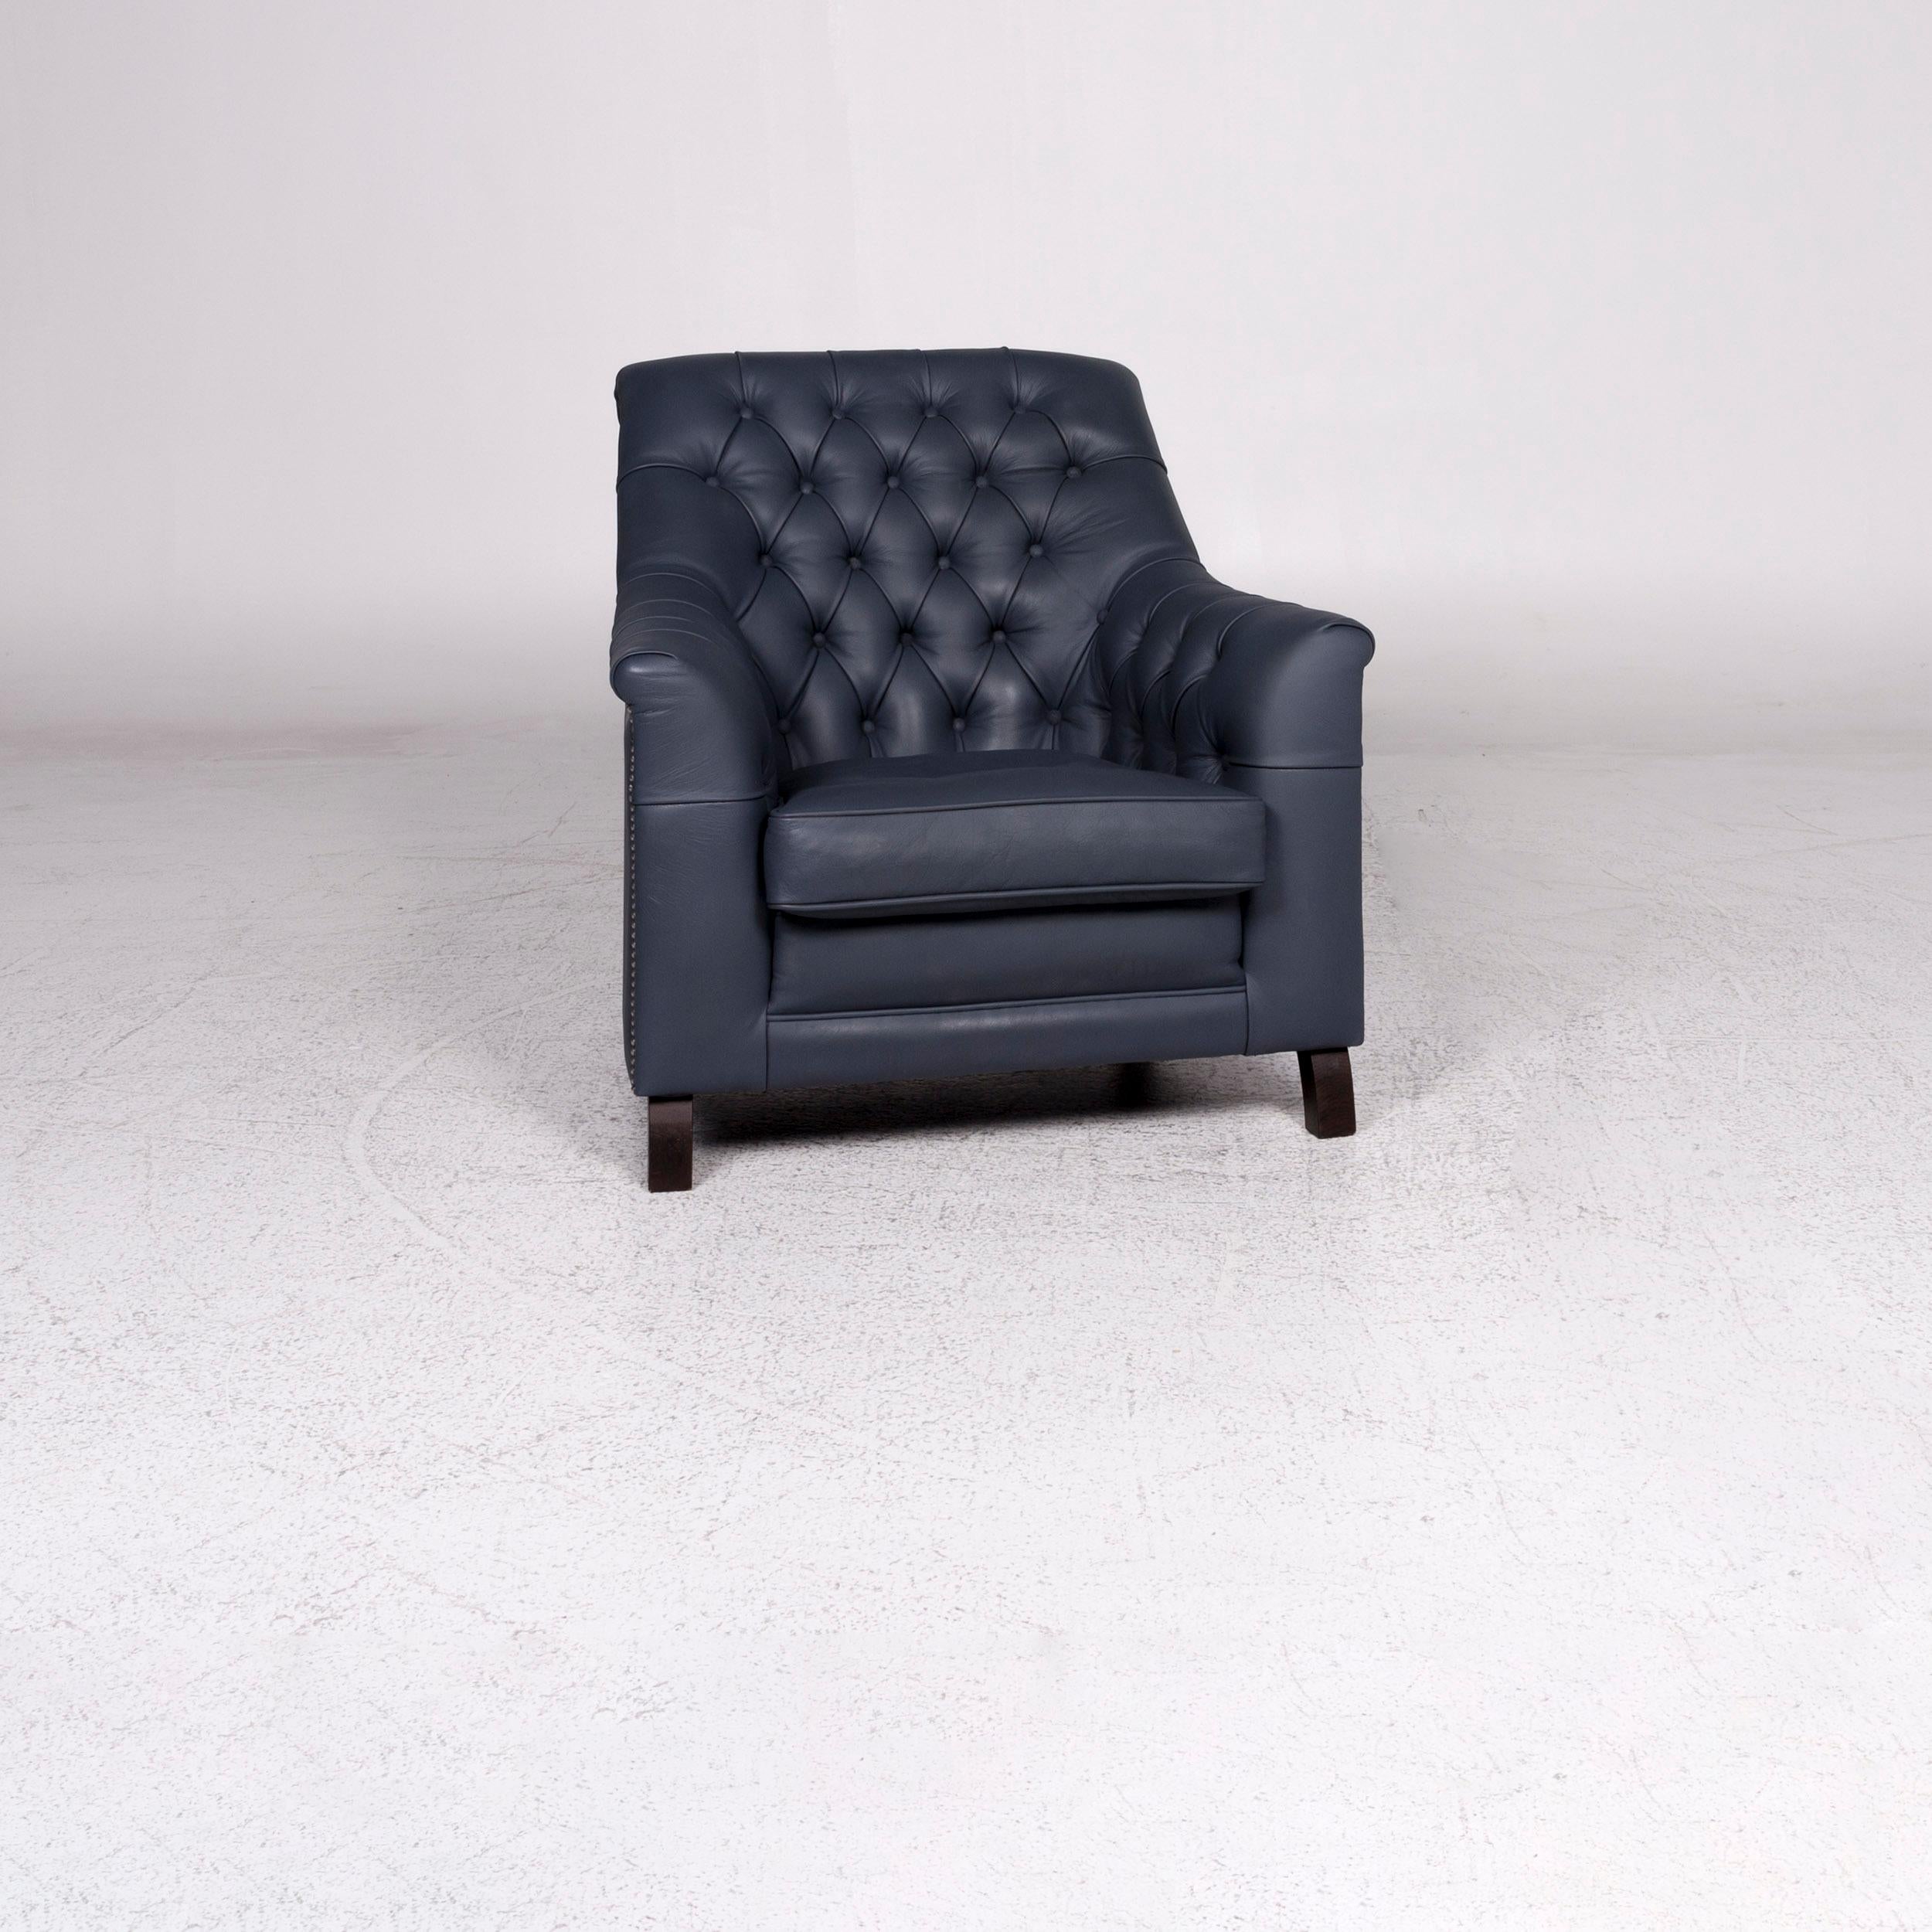 We bring to you a Roche Bobois leather armchair gray retro.
 
 Product measurements in centimeters:
 
 depth 96
 width 86
 height 89
 seat-height 43
 rest-height 60
 seat-depth 60
 seat-width 48
 back-height 51.

  